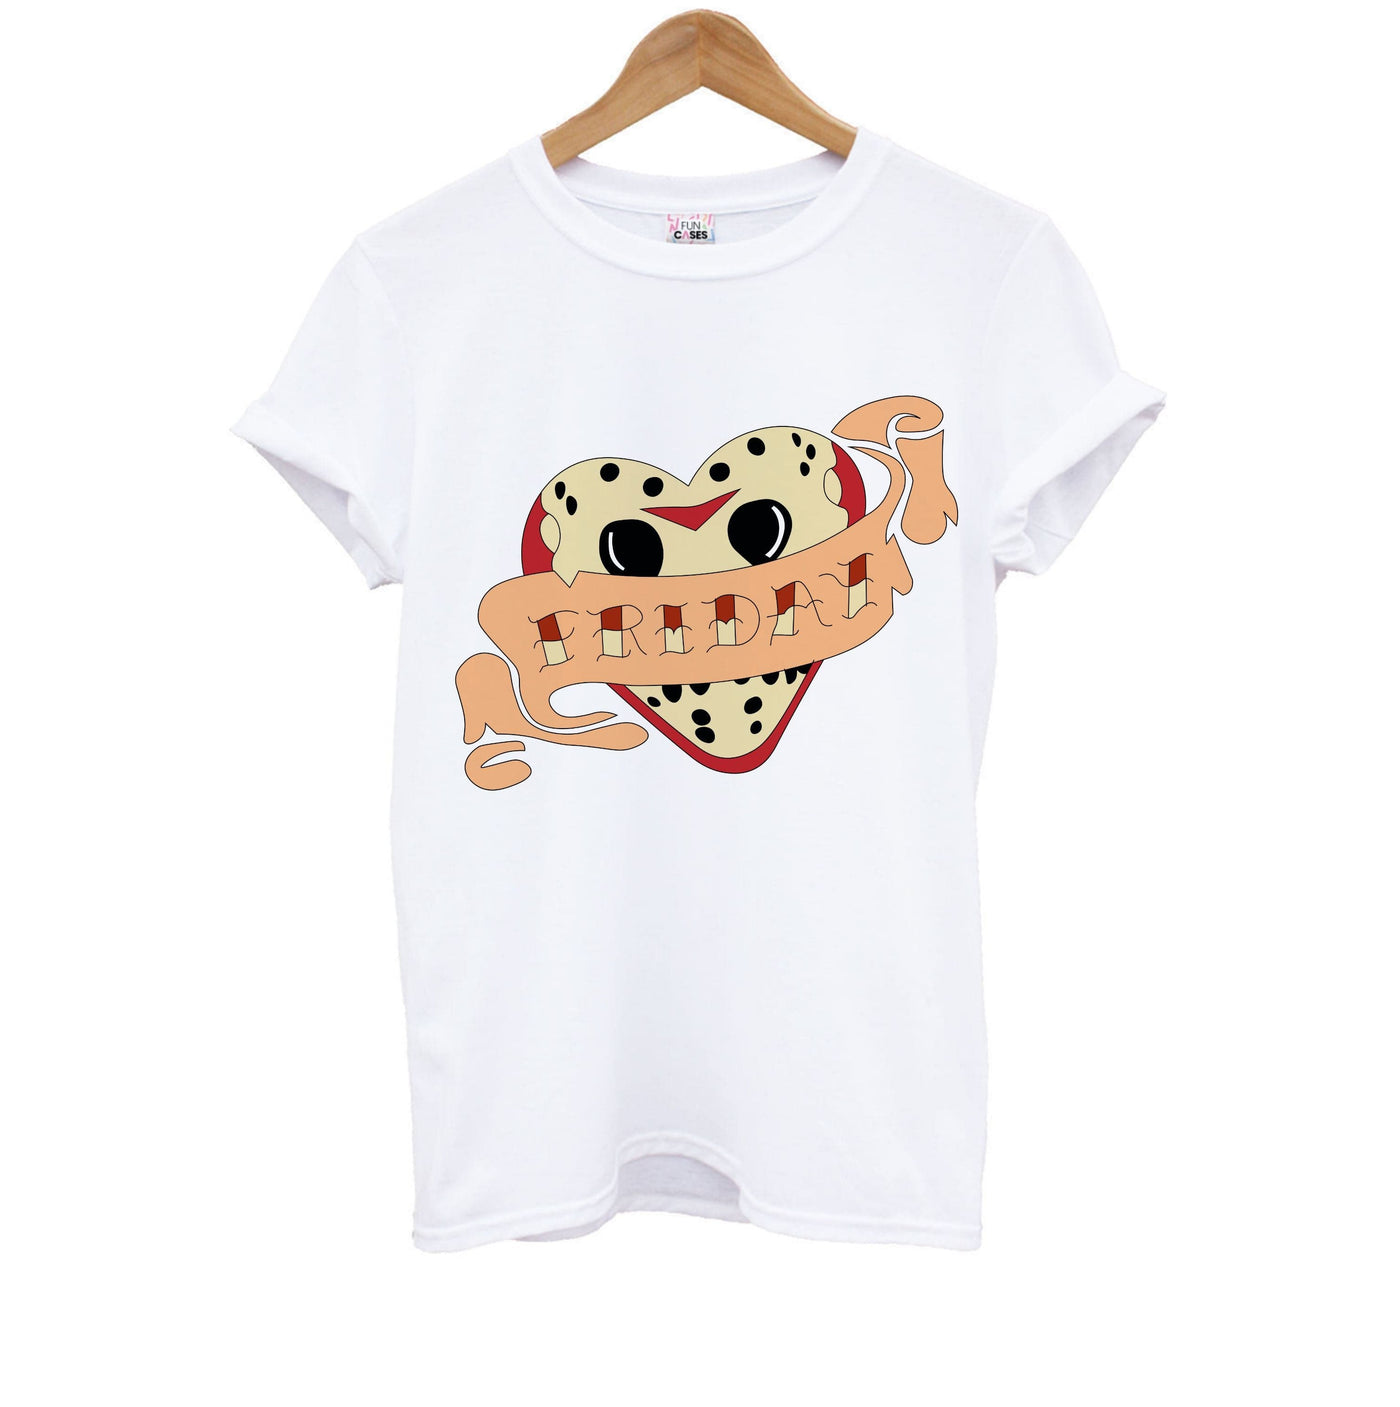 Friday - Friday The 13th Kids T-Shirt